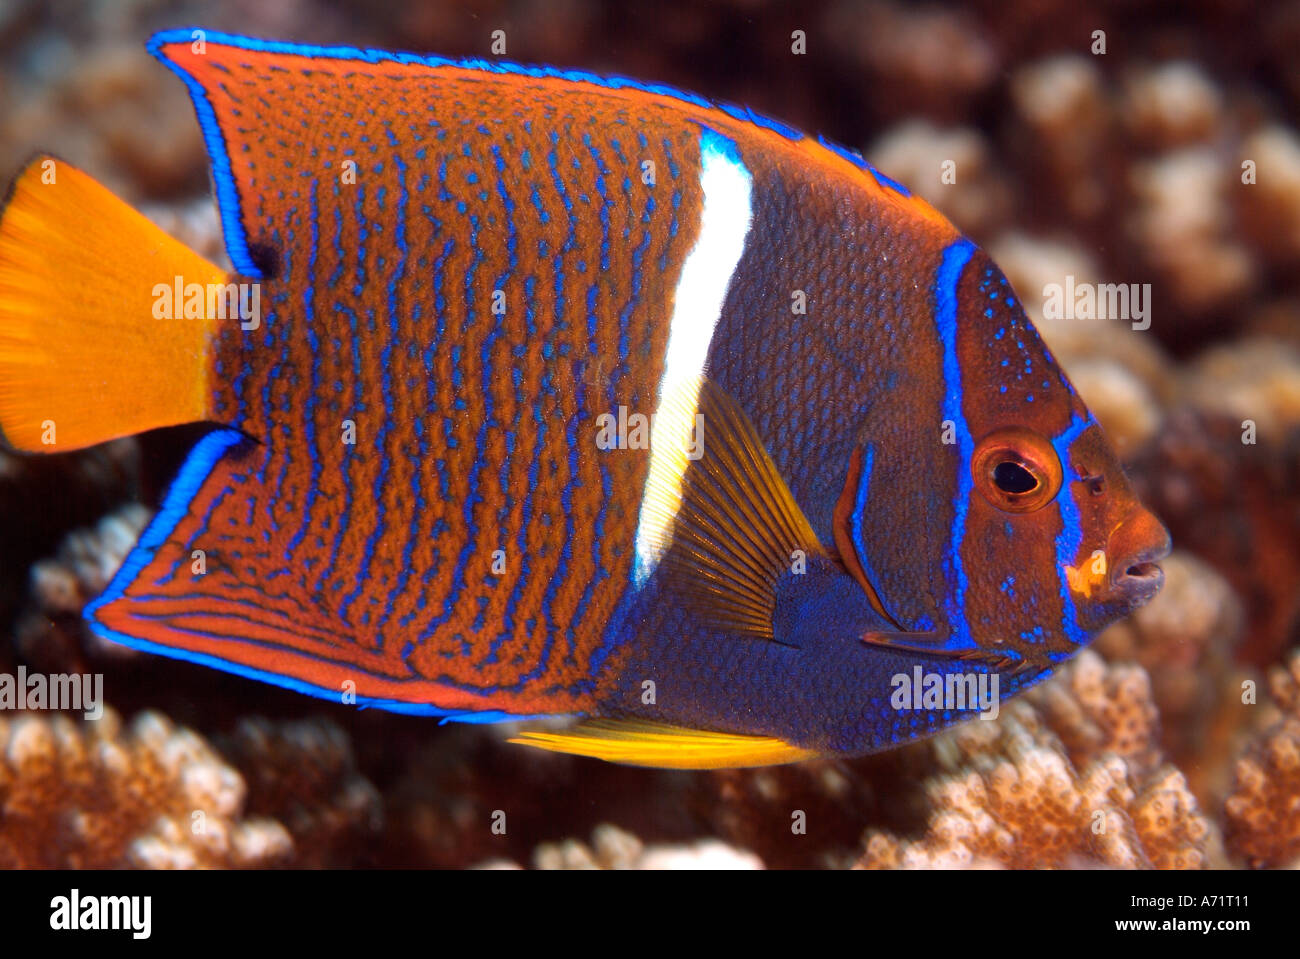 Juvenile king angelfish in the Sea of Cortez Stock Photo